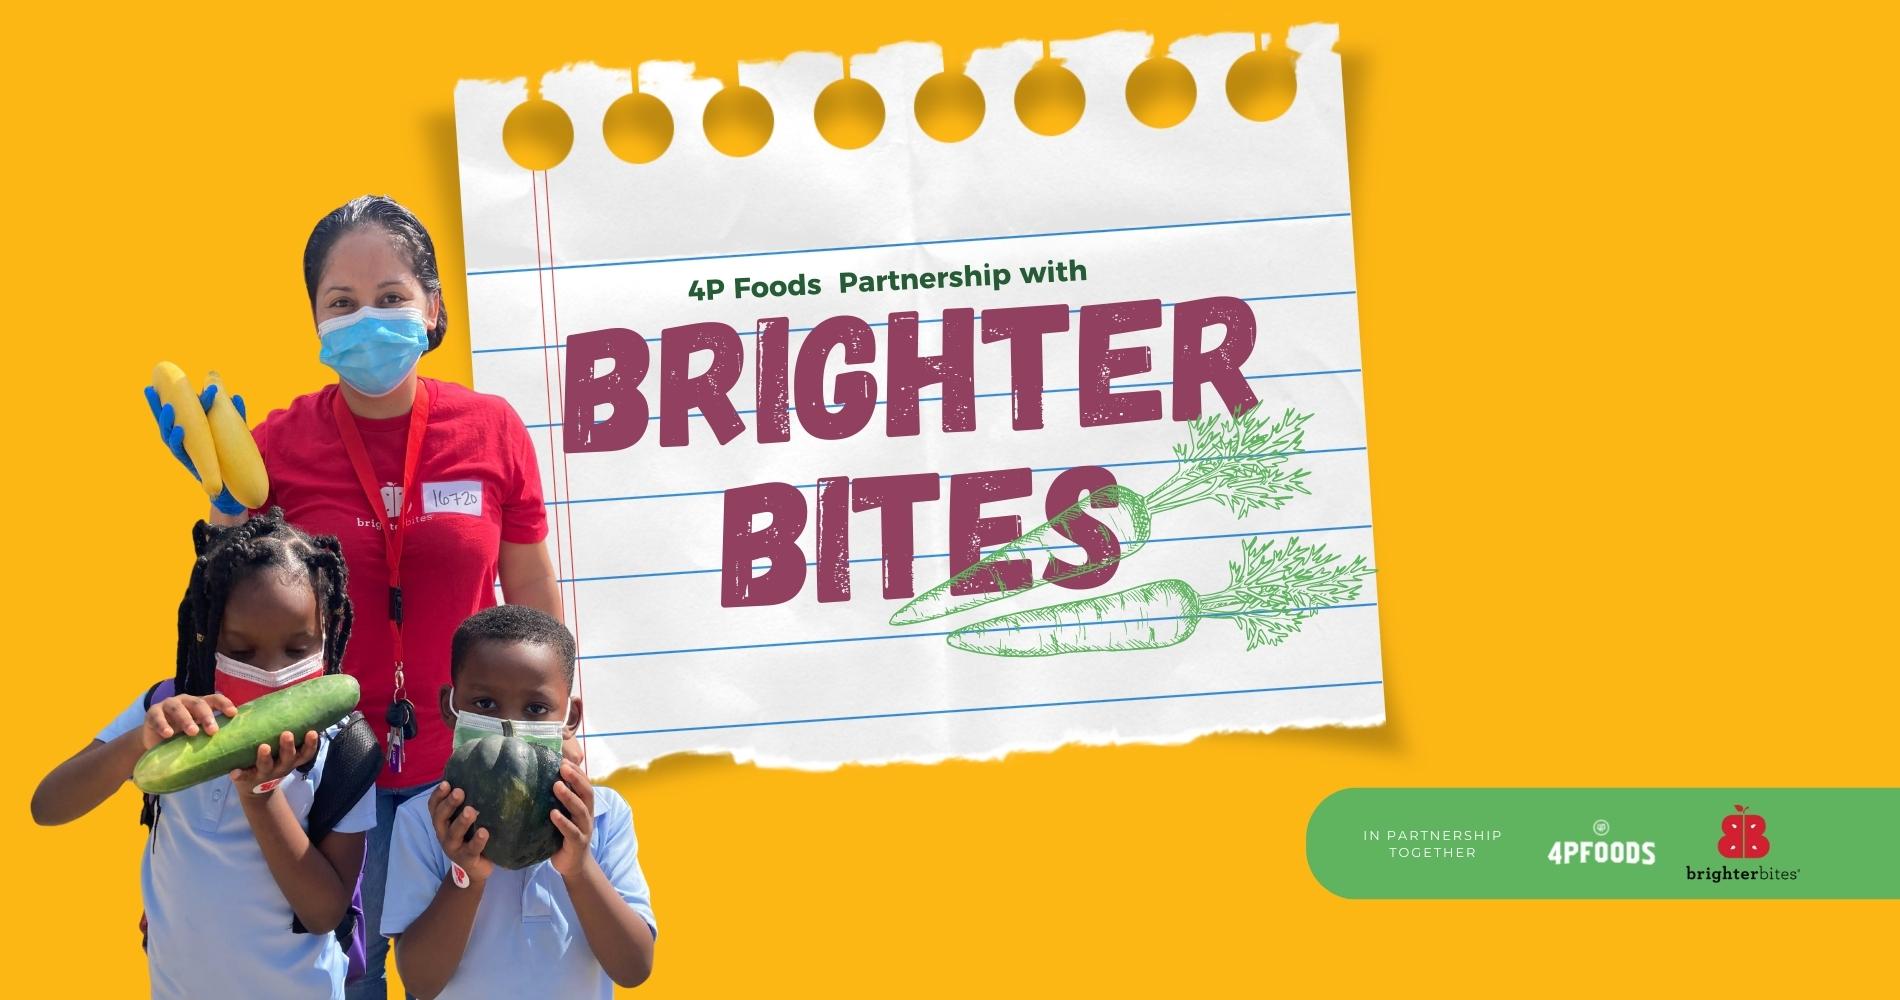 Remarkable Partnership With Brighter Bites Brings Food To Maryland Families image